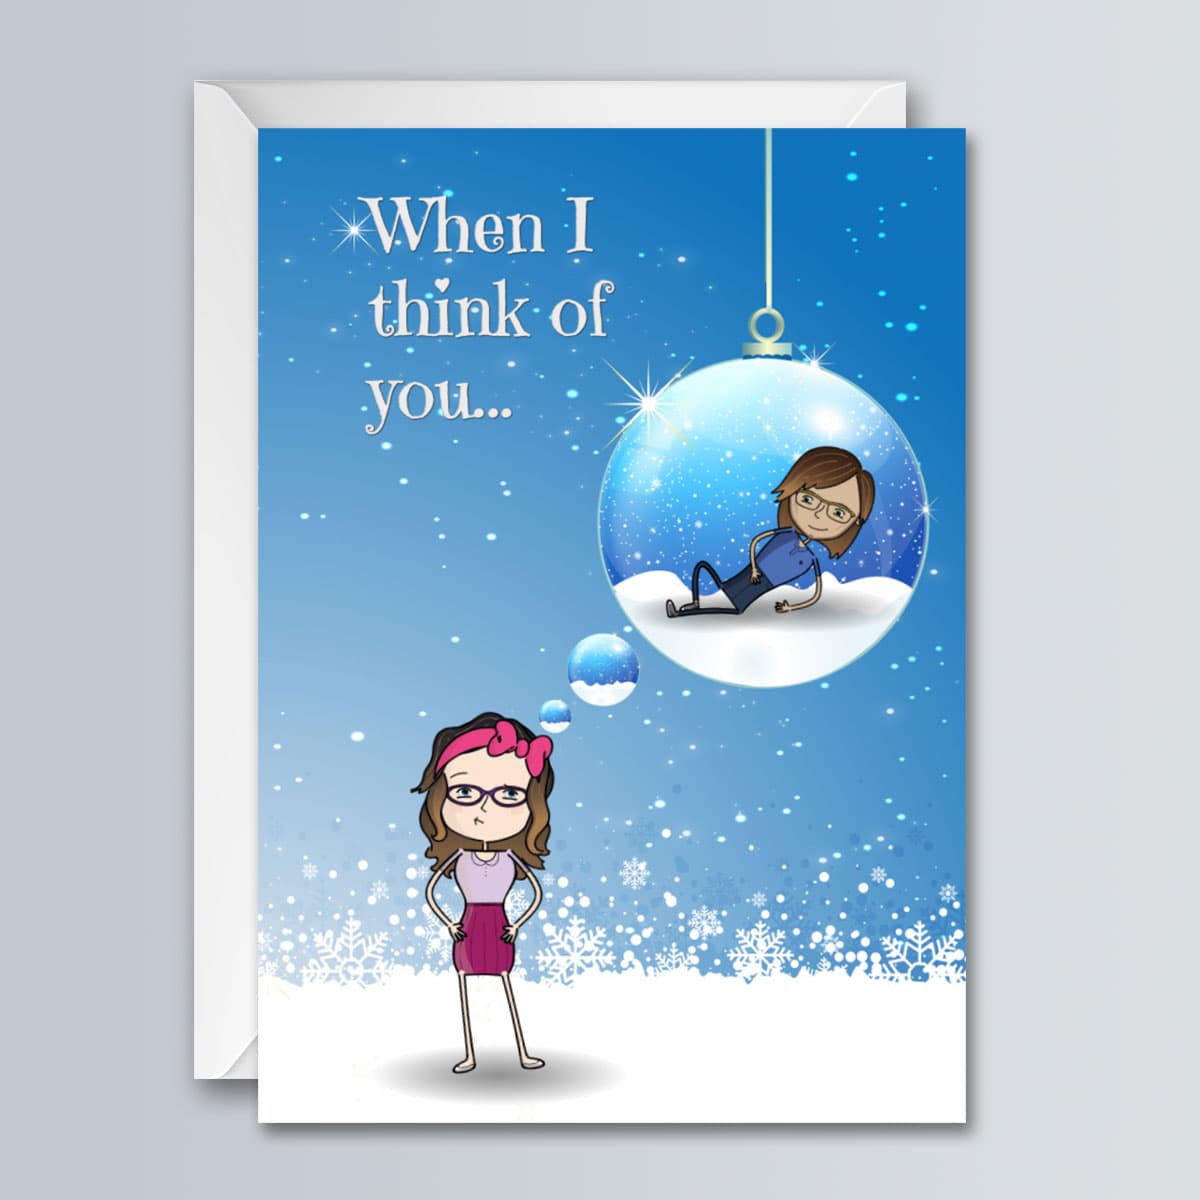 When I think of you - Christmas - Greeting Card